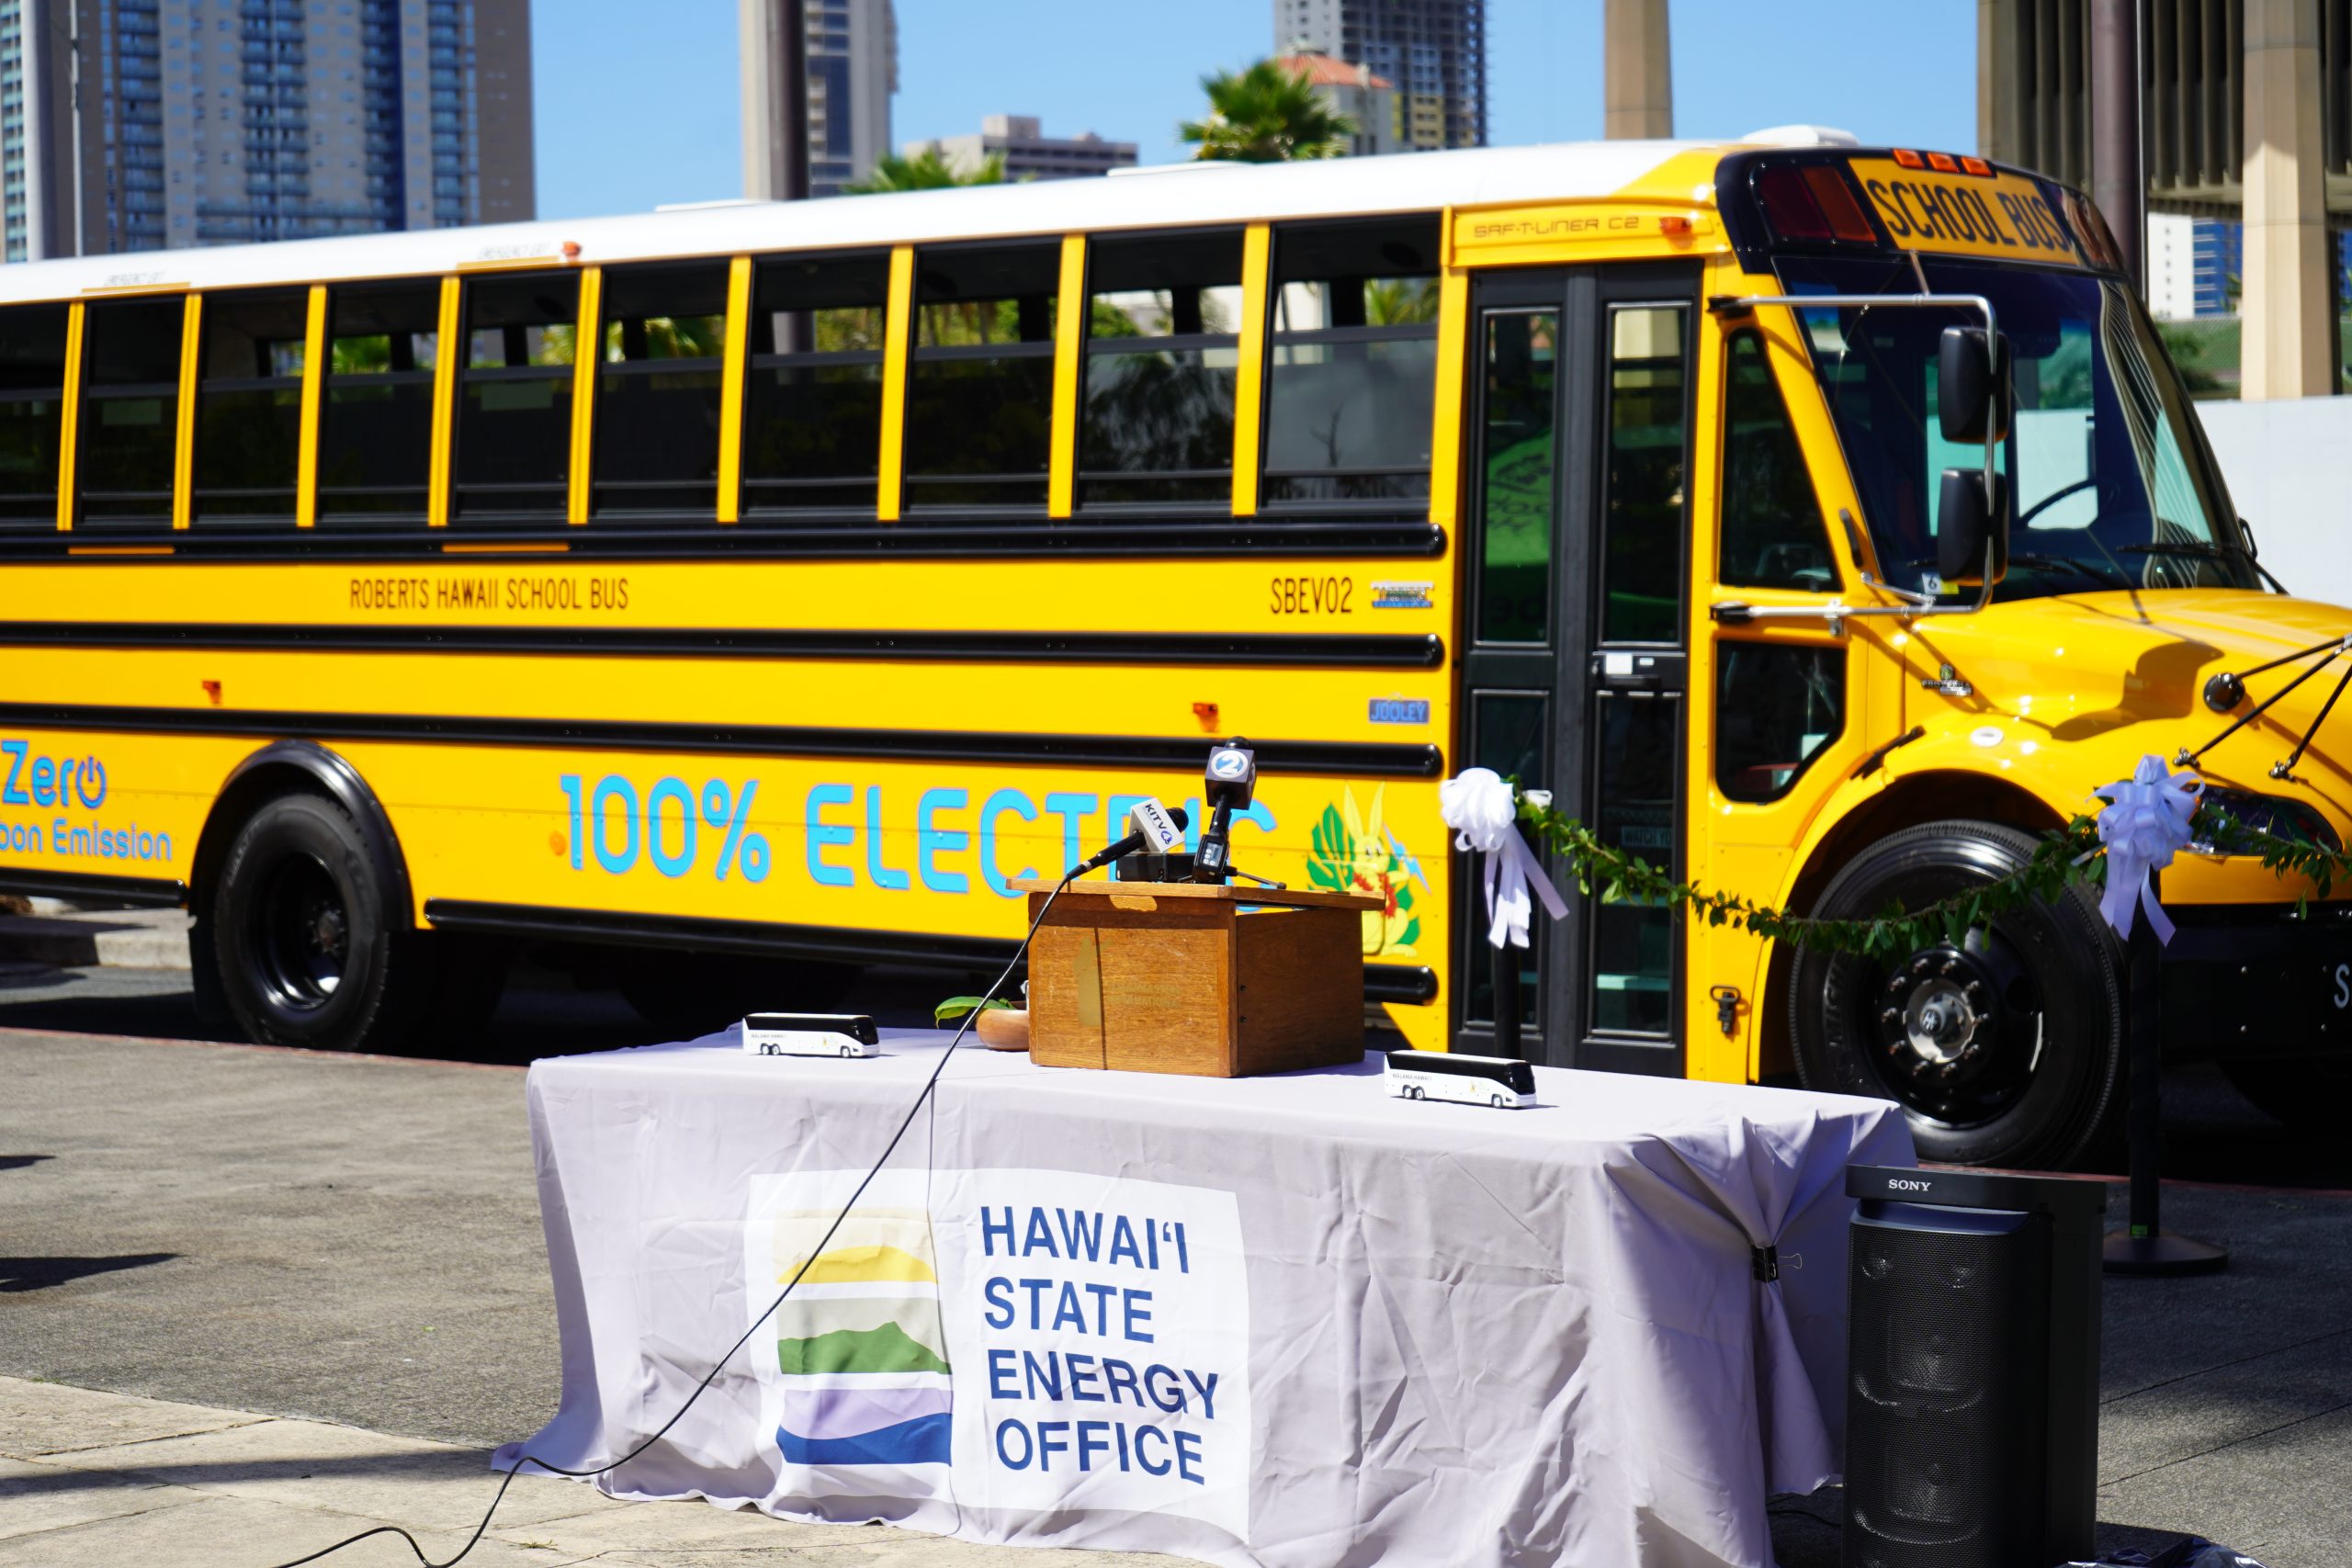 DIESEL REPLACEMENT REBATE PROGRAM HELPS BRING FIVE NEW ELECTRIC-BATTERY BUSES TO HAWAI‘I